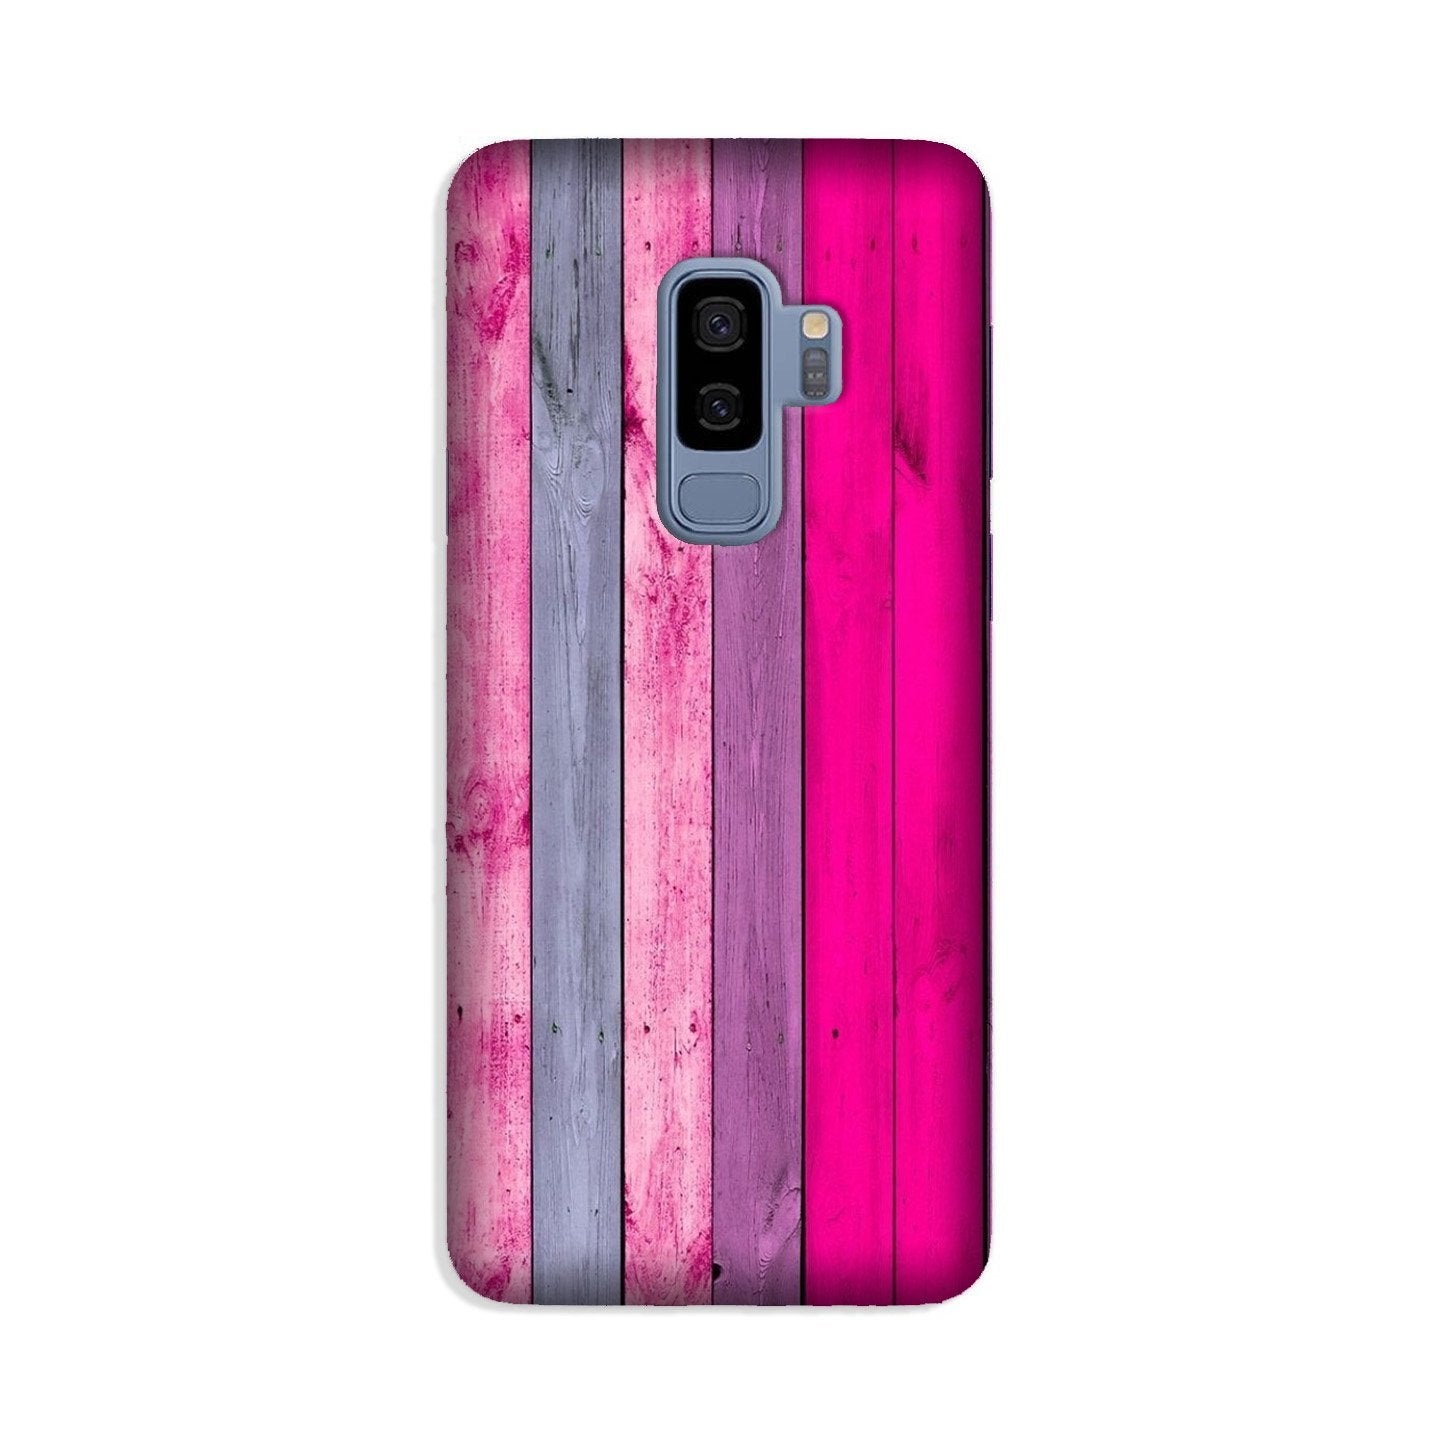 Wooden look Case for Galaxy S9 Plus